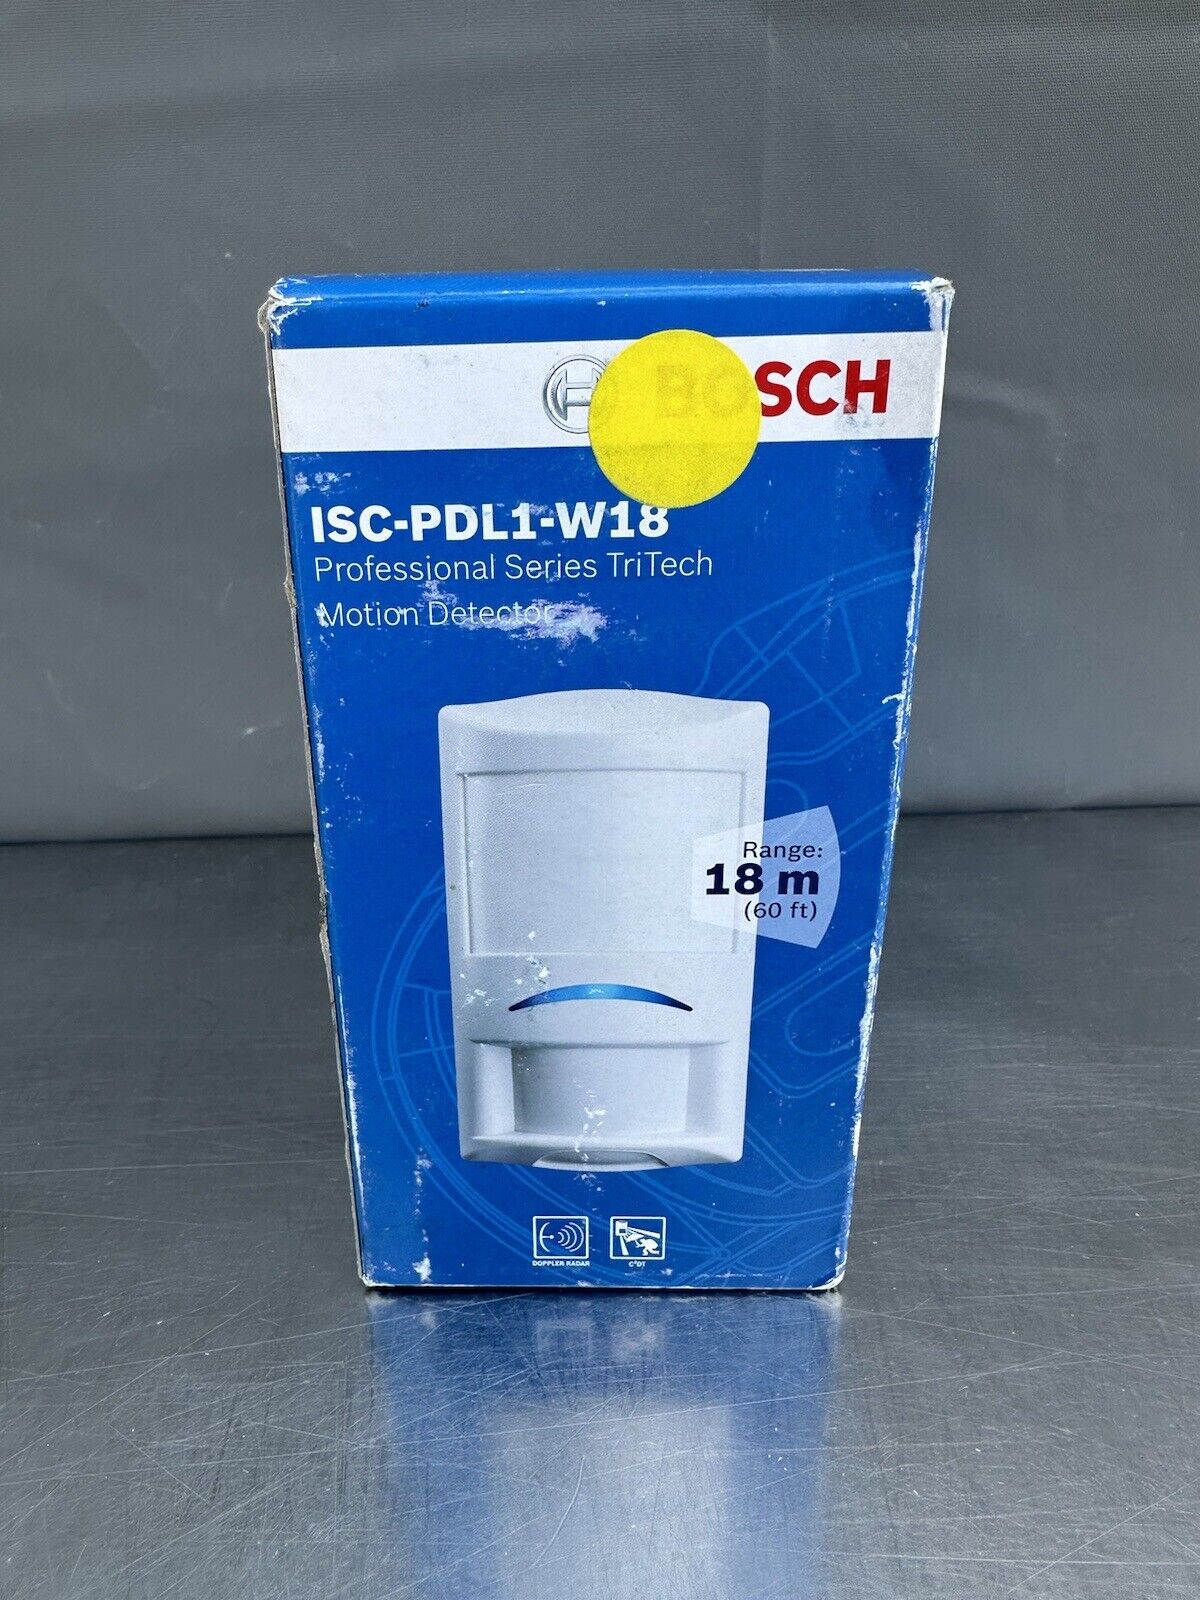 BOSCH ISC-PDL1-W18 Professional Series TriTech Motion Detector New